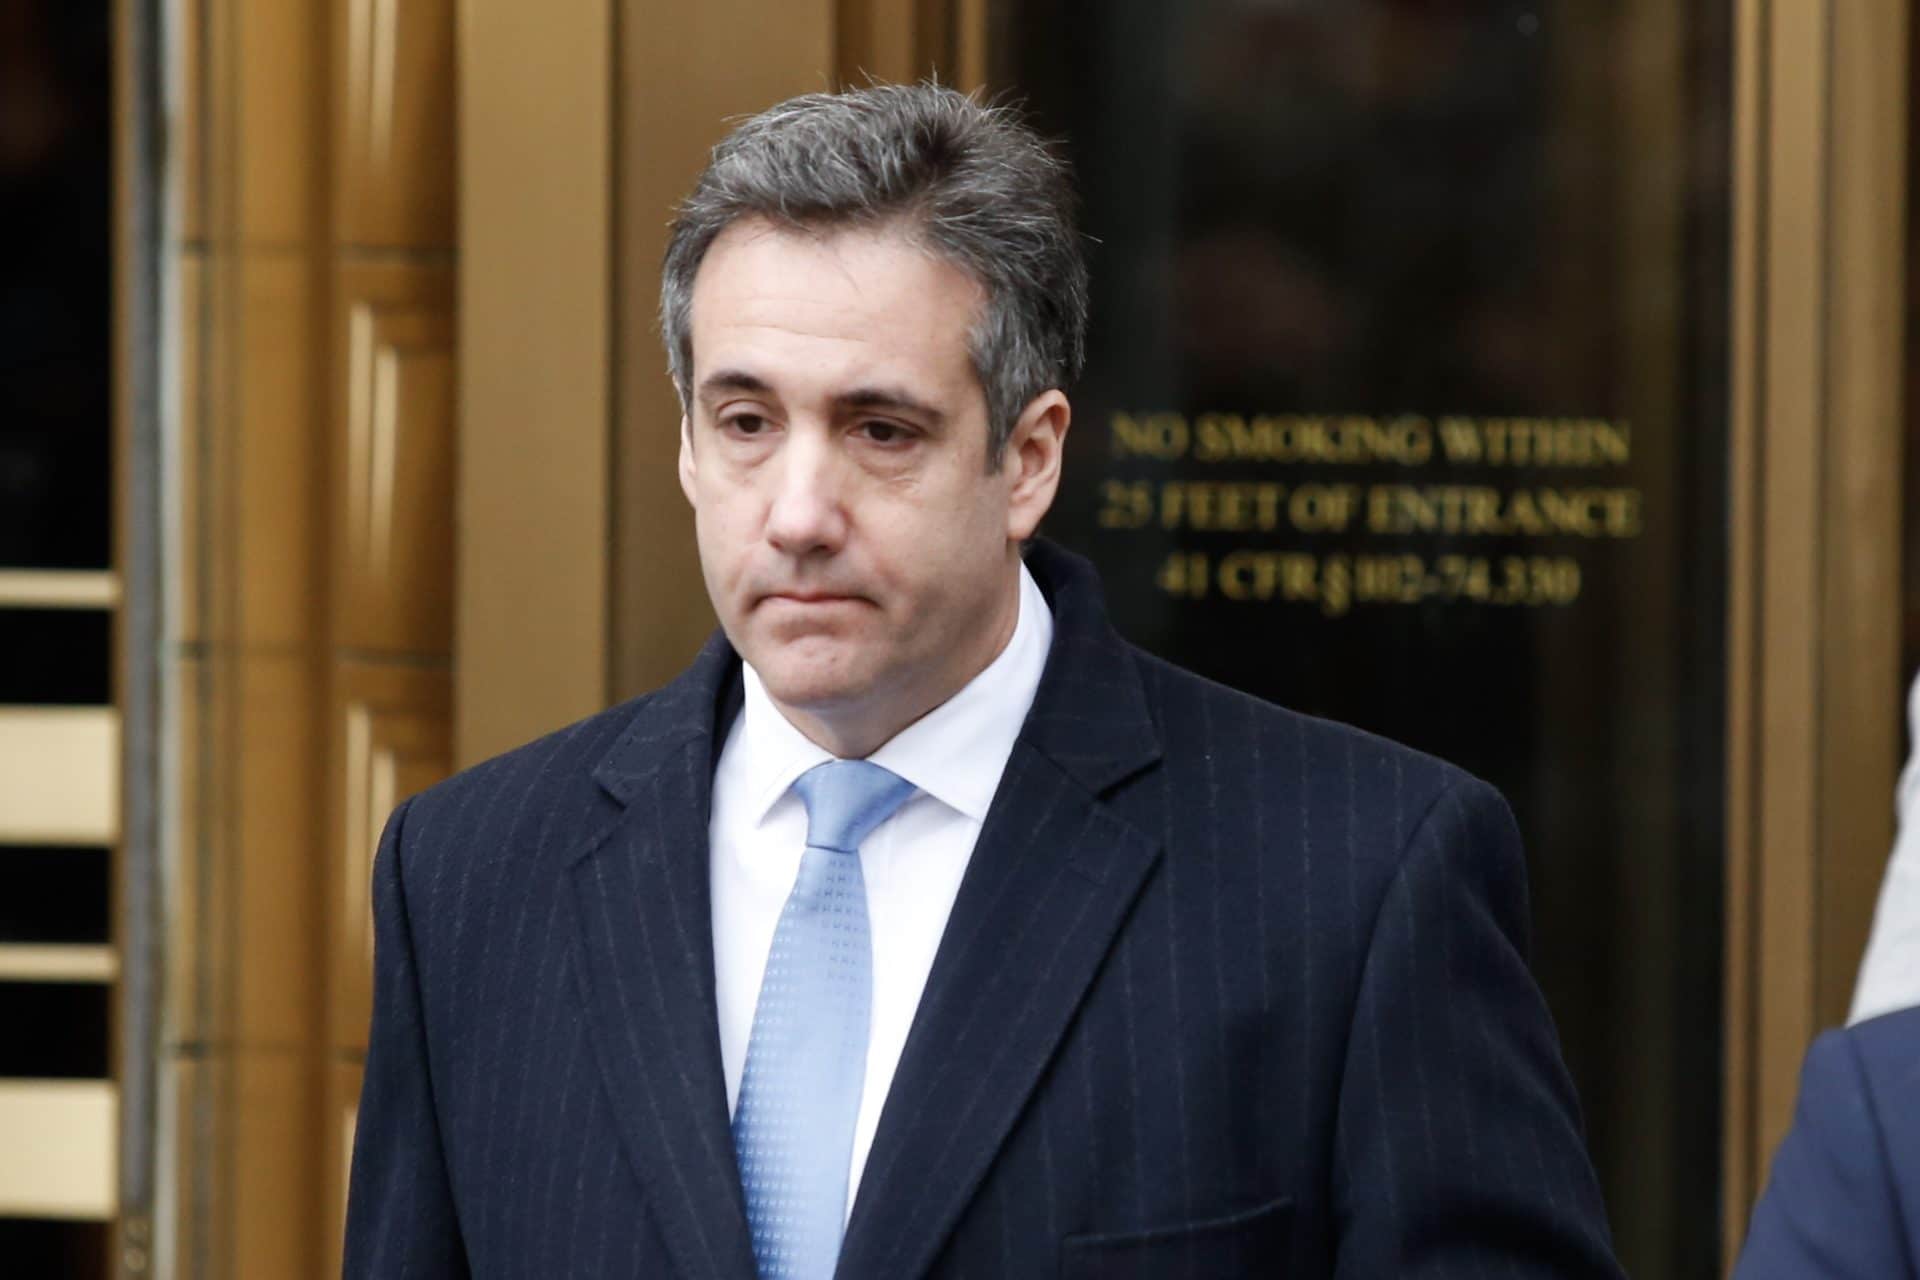 President Donald Trump's Former Lawyer Michael Cohen Sentenced To 3 Years In Prison